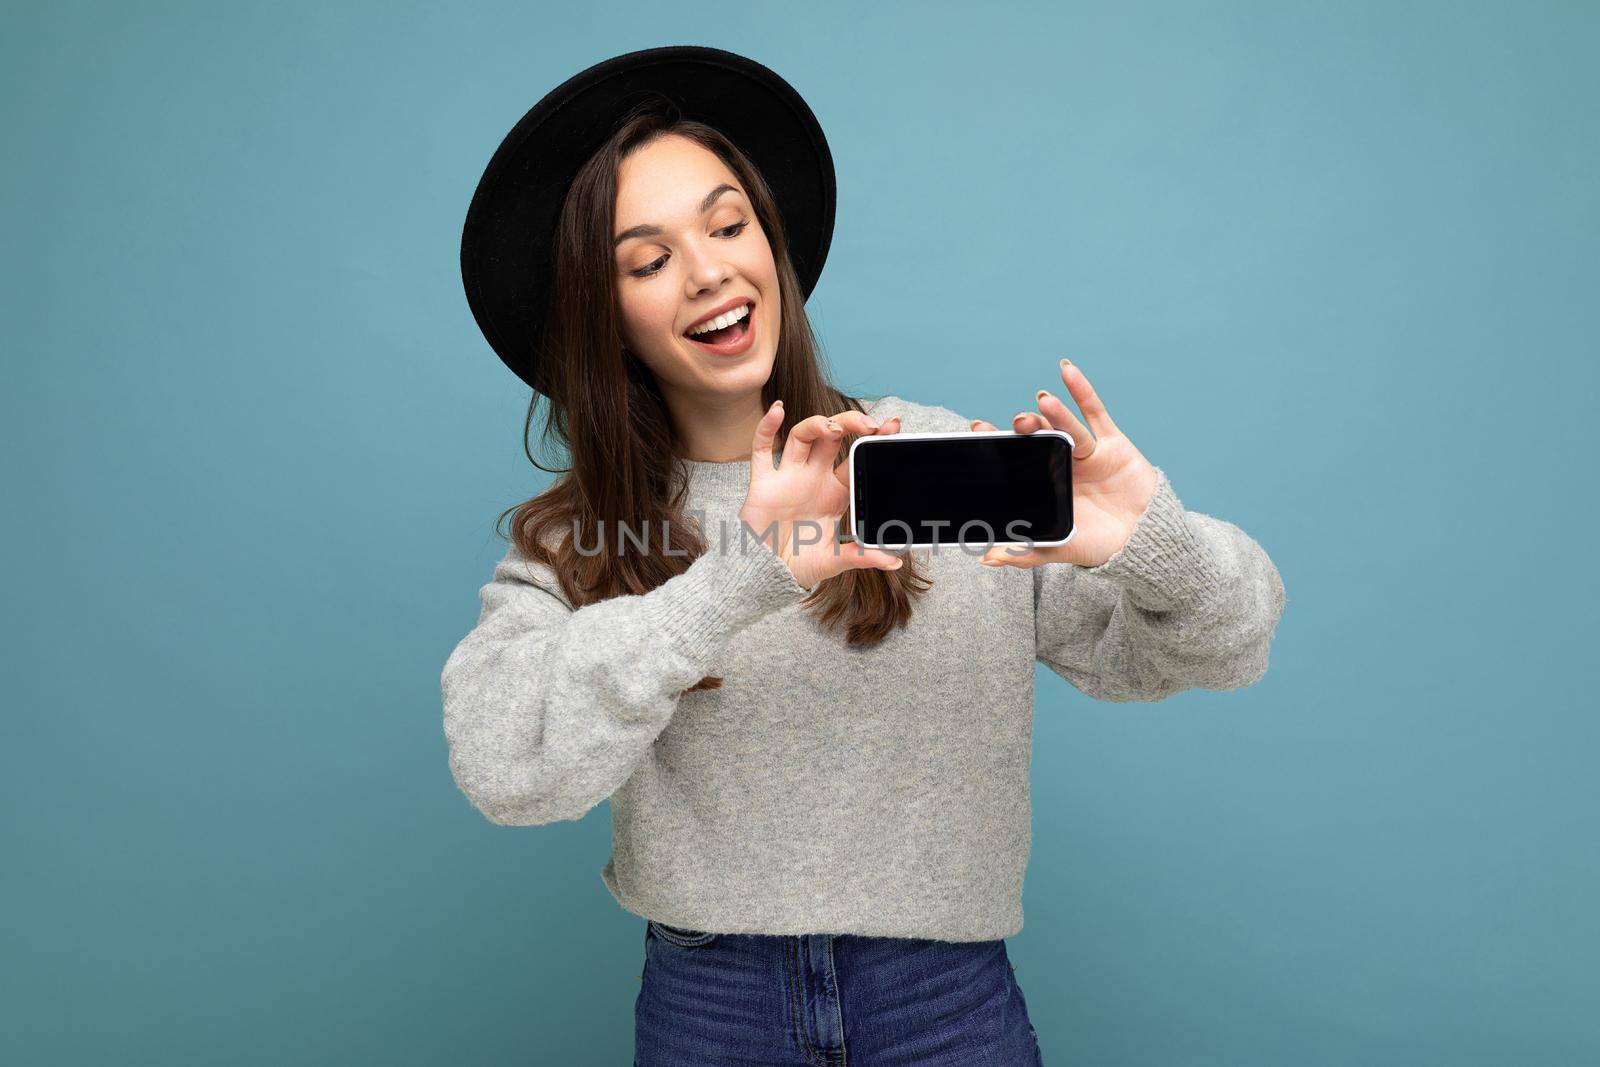 Attractive young smiling woman wearing black hat and grey sweater holding smartphone looking down isolated on background.Mock up, cutout